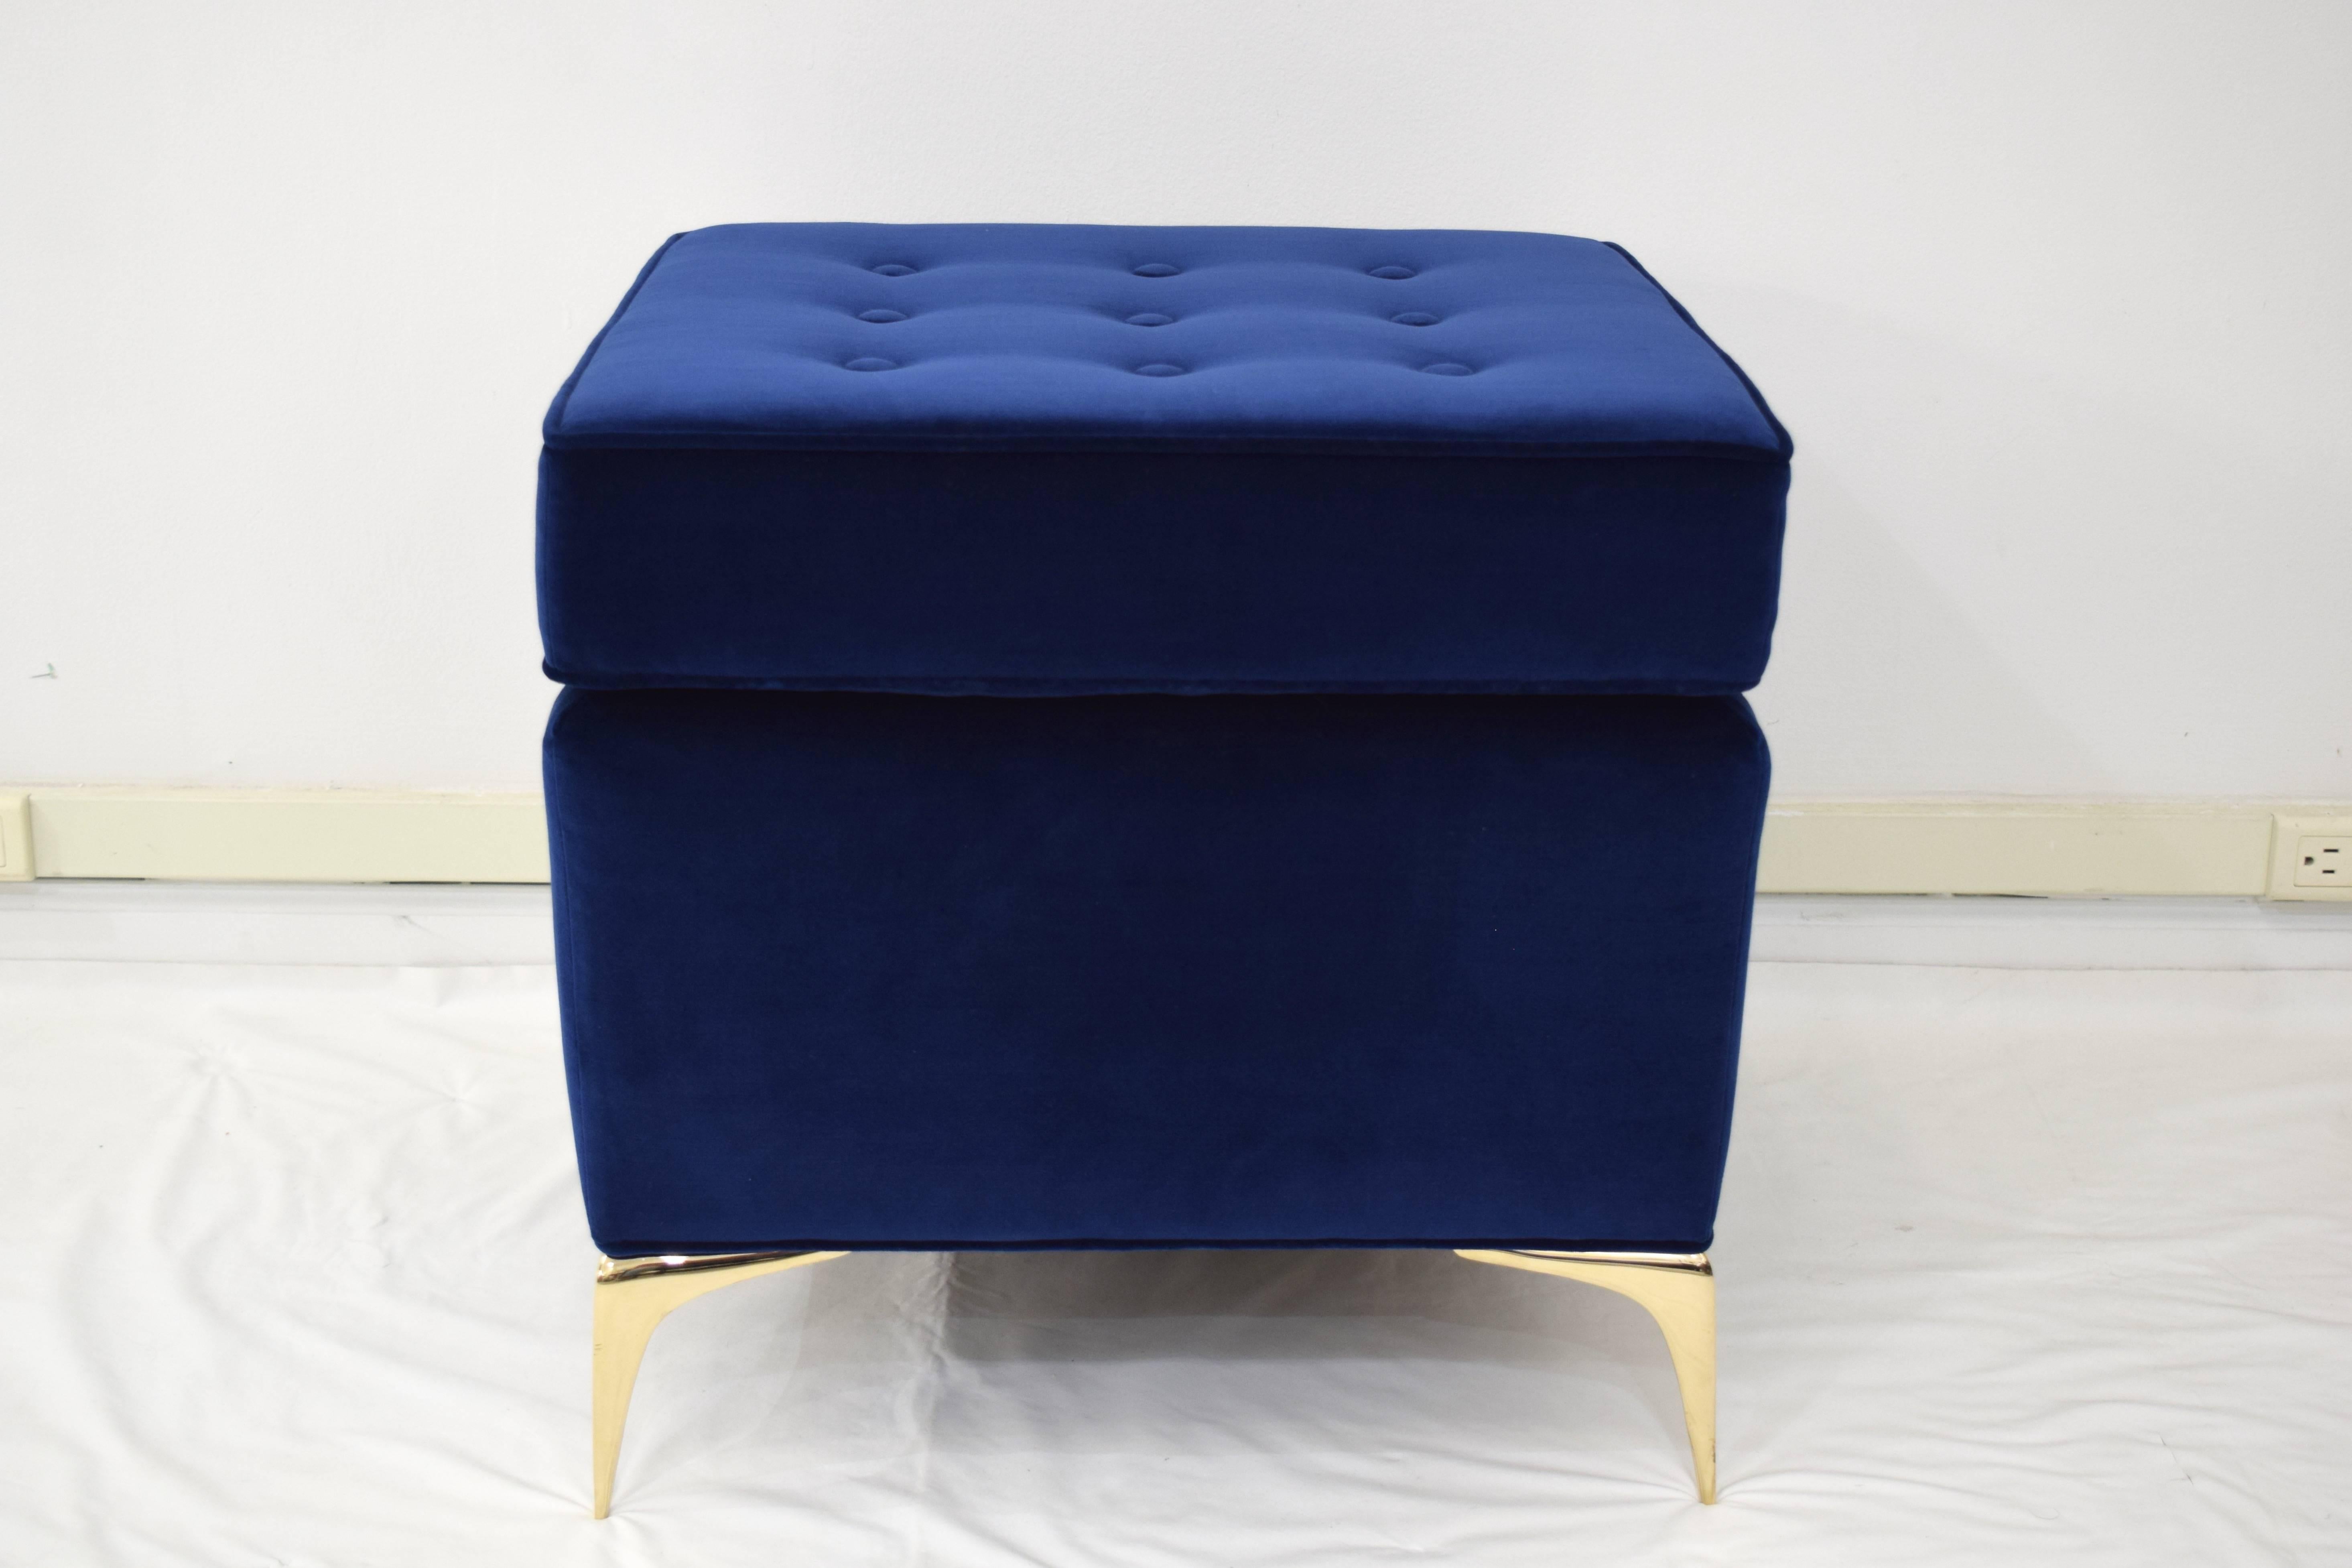 Exquisite bespoke Cubist stiletto ottoman designed by Irwin Feld Design for CF Modern in the manner of Gio Ponti.
A button tufted cushion rests atop an upholstered base which attaches to four hand cast and hand polished solid  brass 5